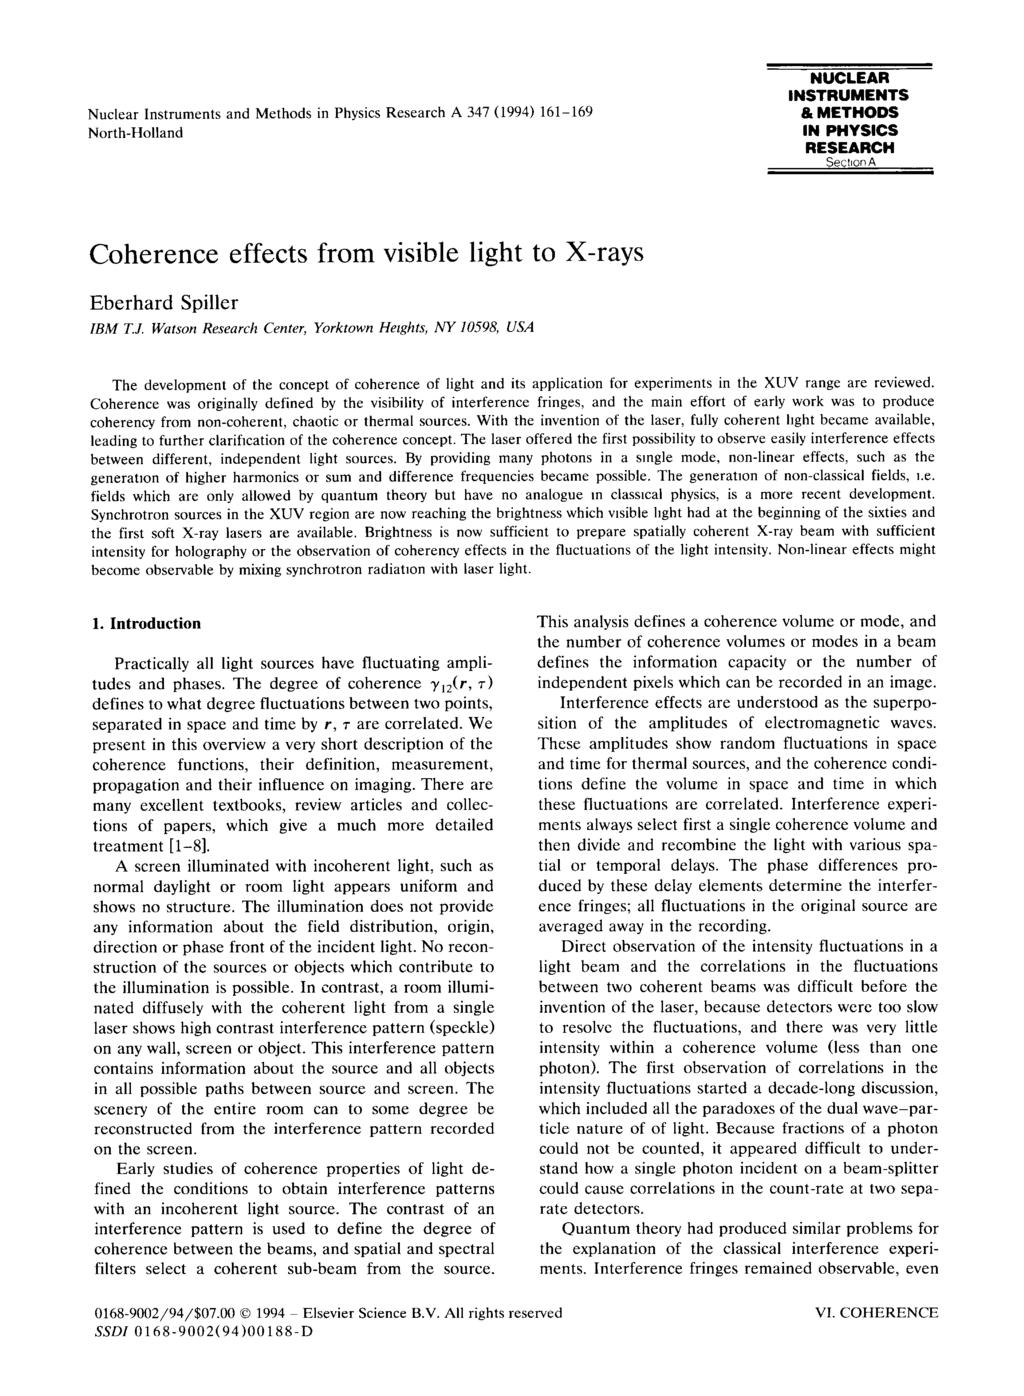 Nuclear Instruments and Methods in Physics Research A 347 (1994) 161-169 North-Holland NUCLEAR INSTRUMENTS & METHODS IN PHYSICS RESEARCH Section A Coherence effects from visible light to X-rays